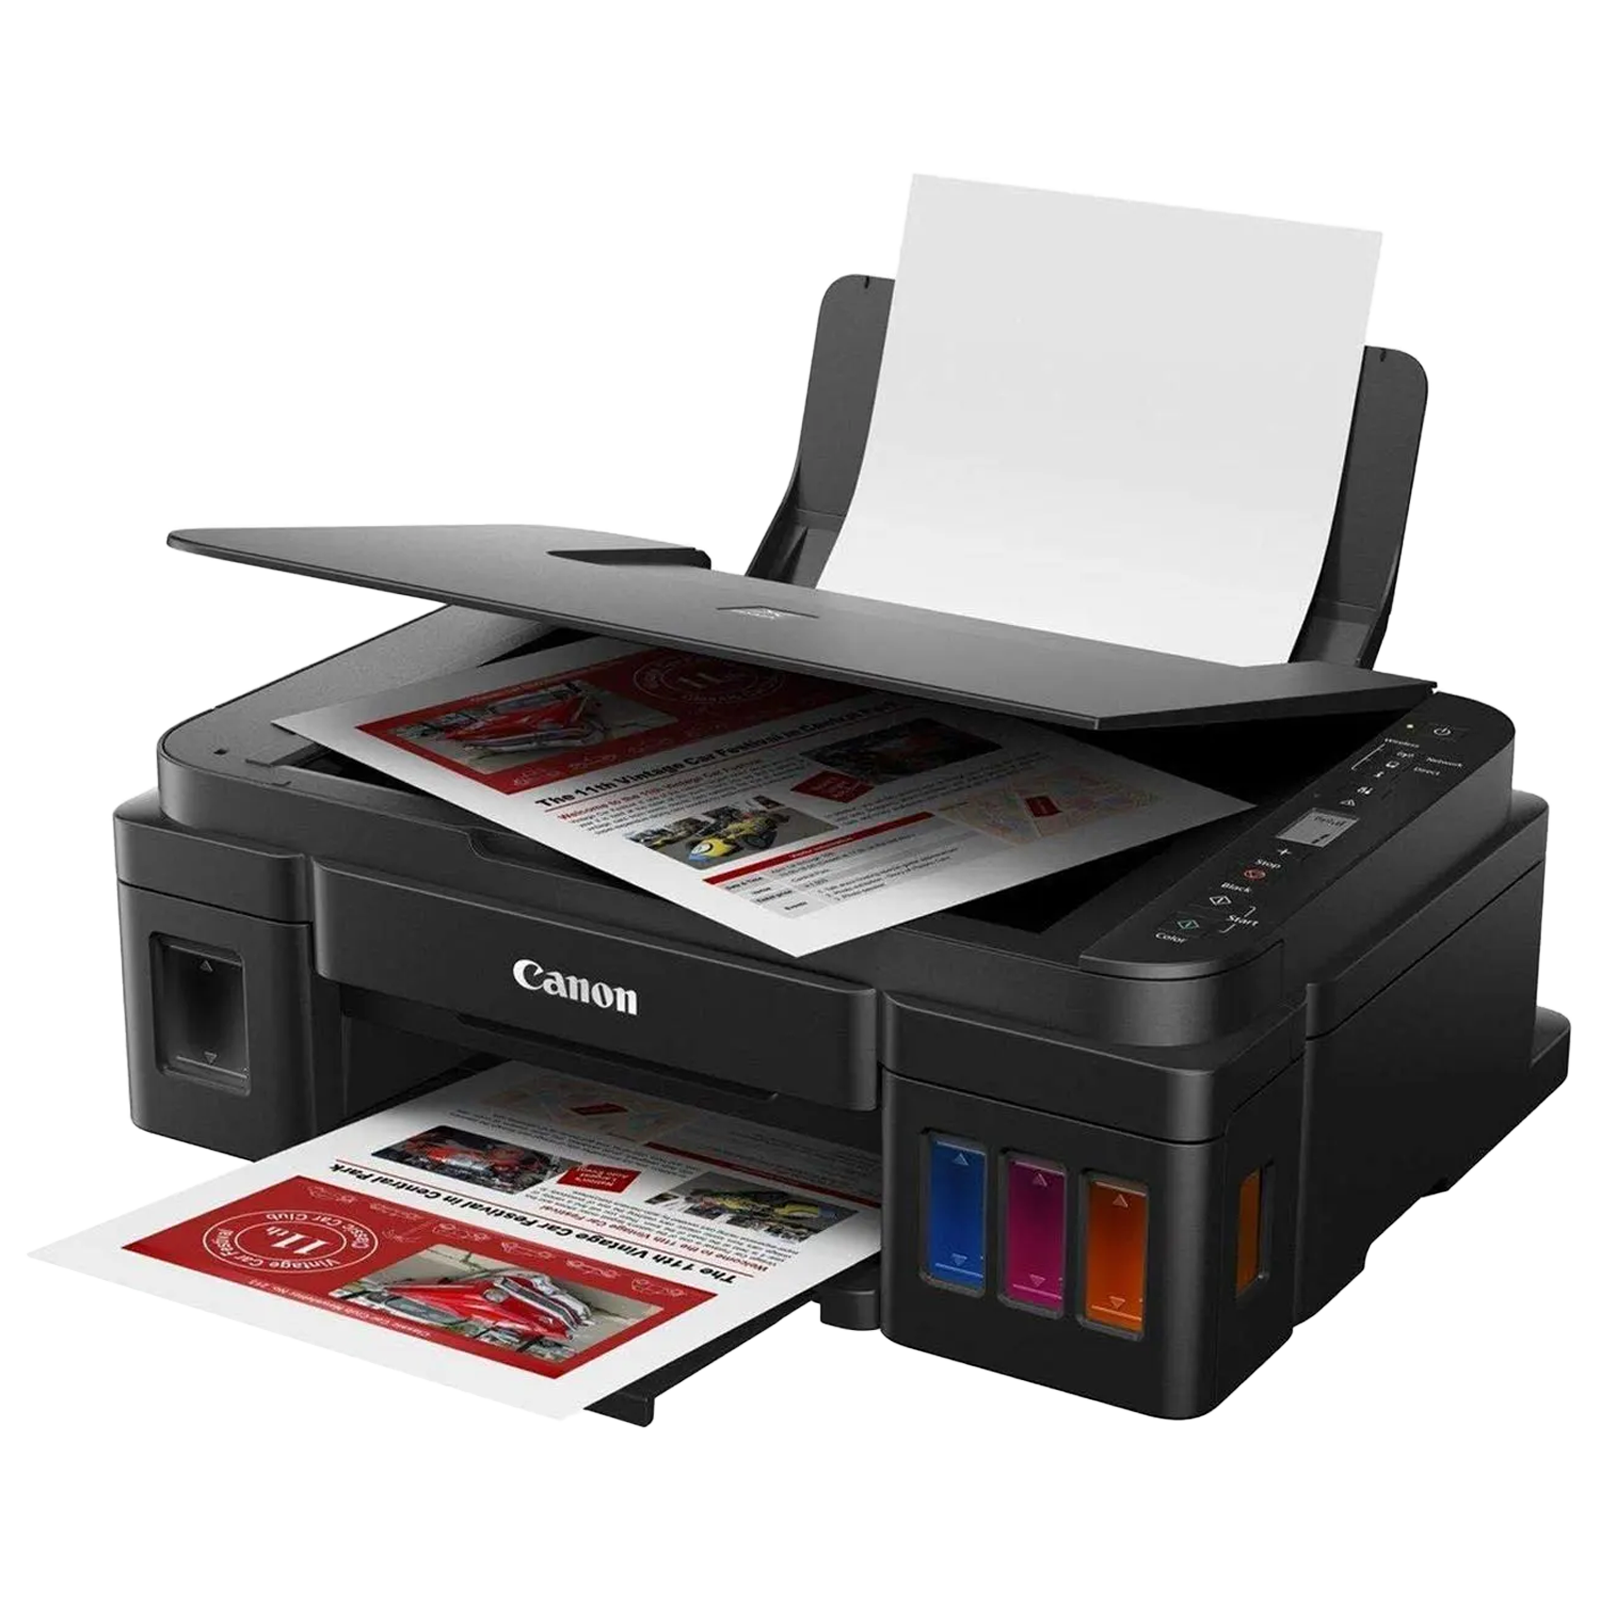 Canon Pixma G3010 All-in-One Ink Tank Printer (Wifi Connectivity, 2315C018AB, Black)_2